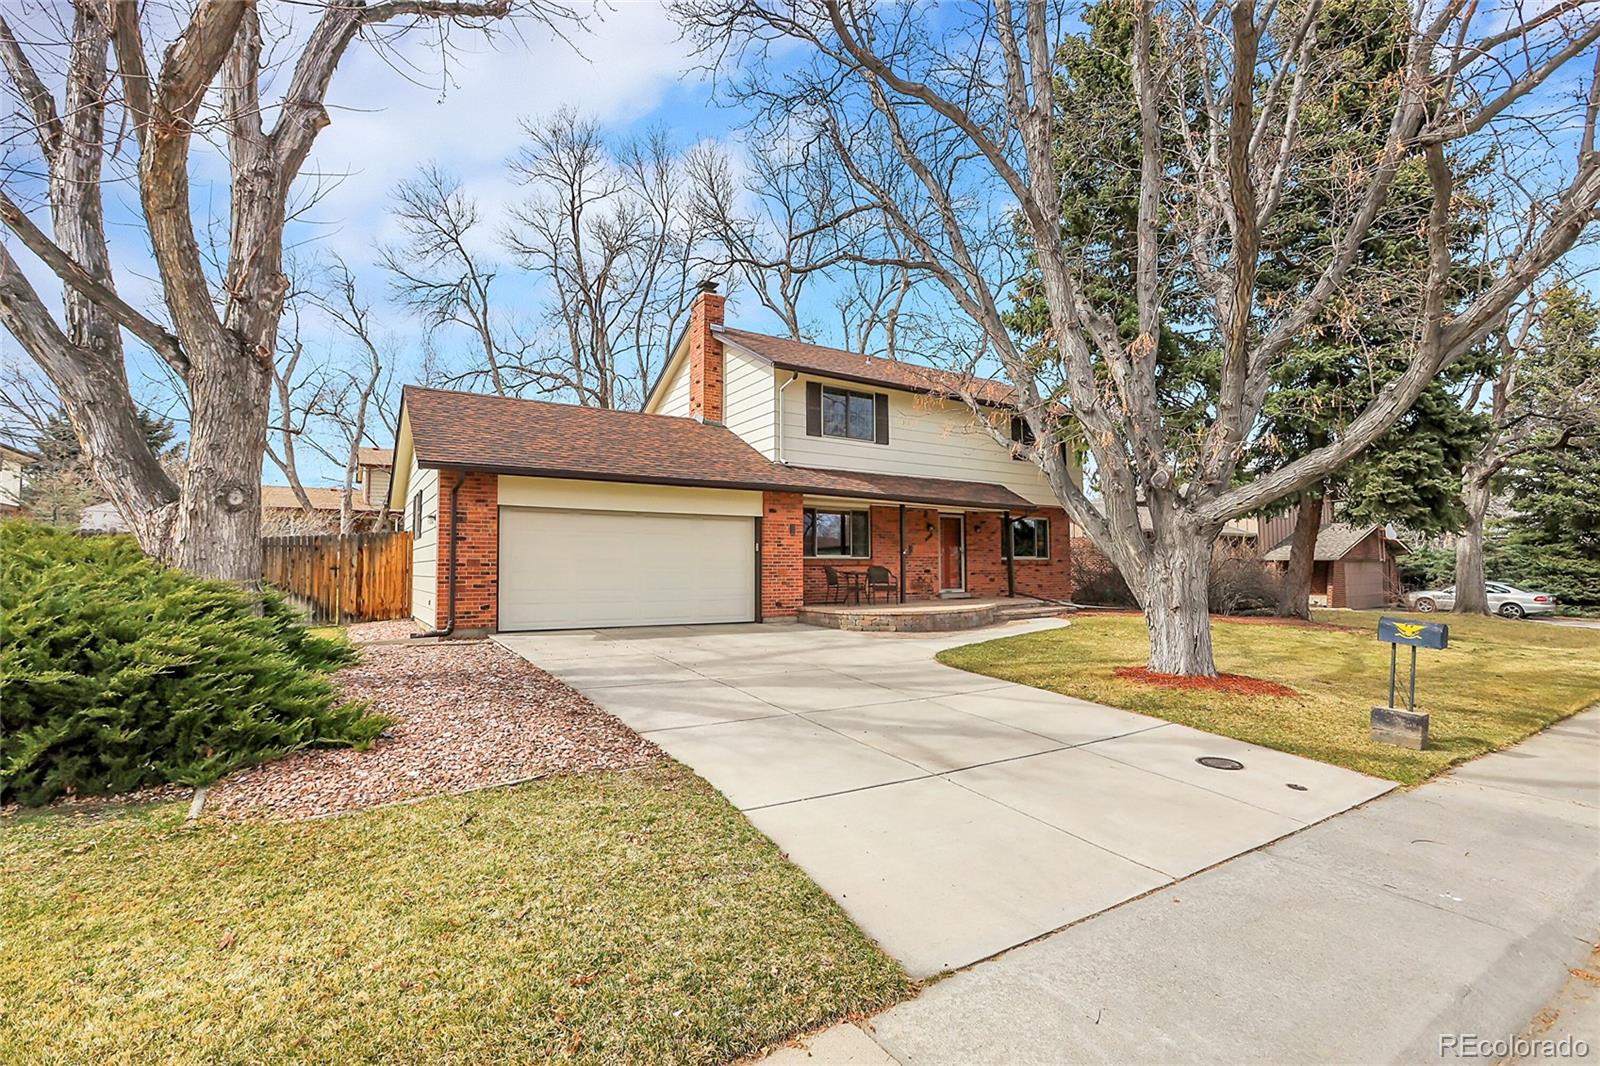 Report Image for 1633 S Holland Street,Lakewood, Colorado